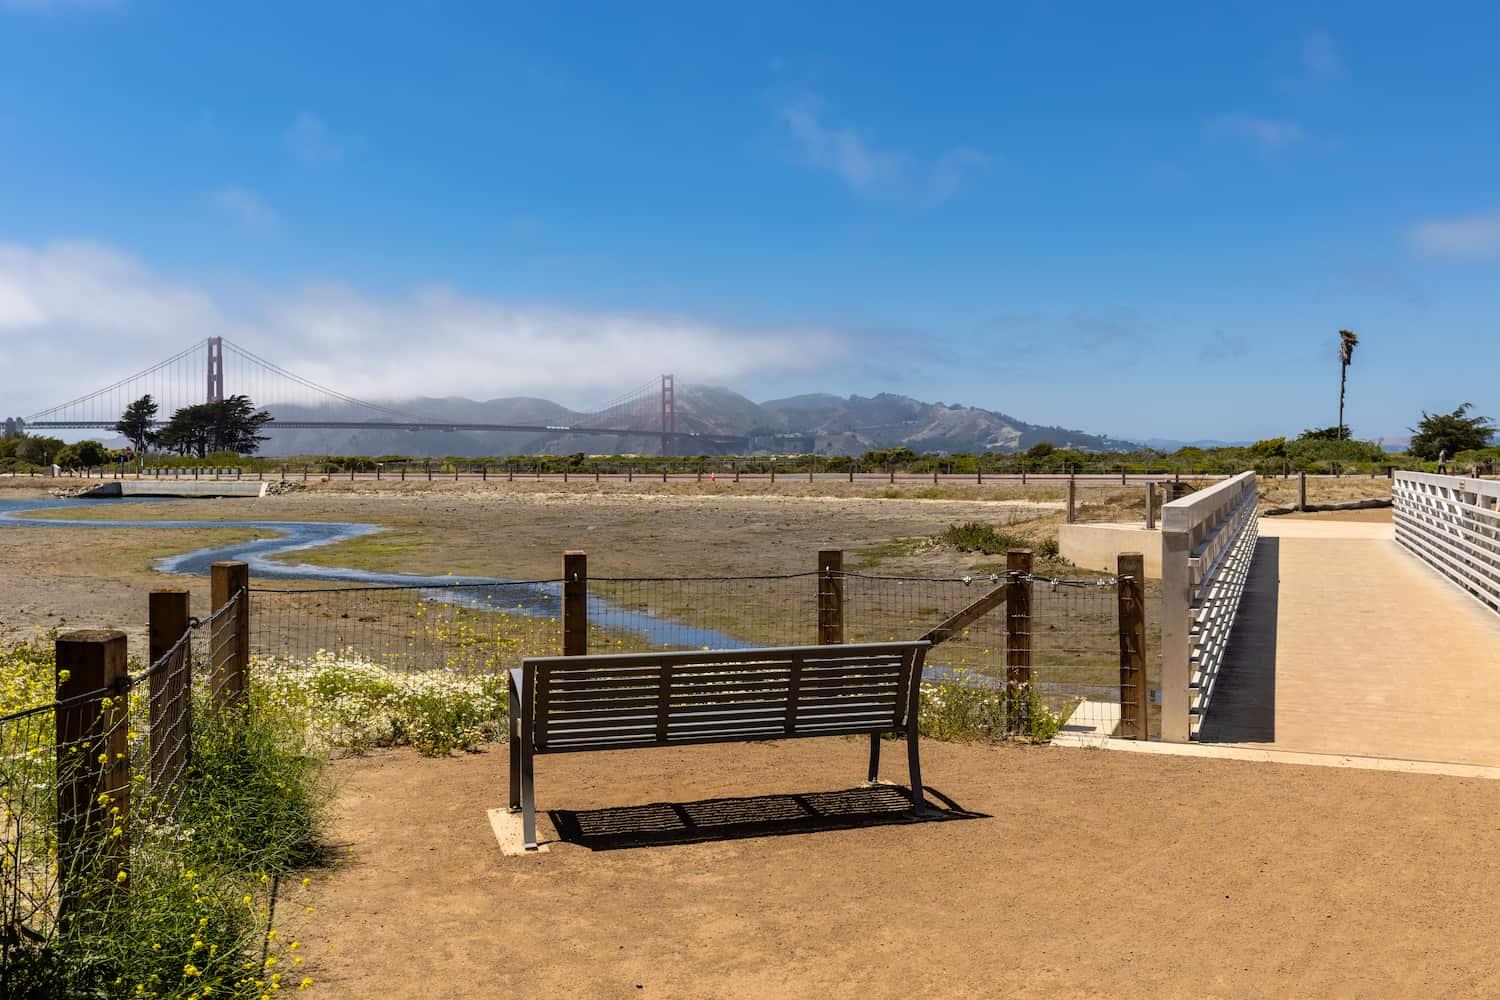 Quartermaster Reach Marsh in the Presidio with a bench and pedestrian bridge. Photo by Charity Vargas.